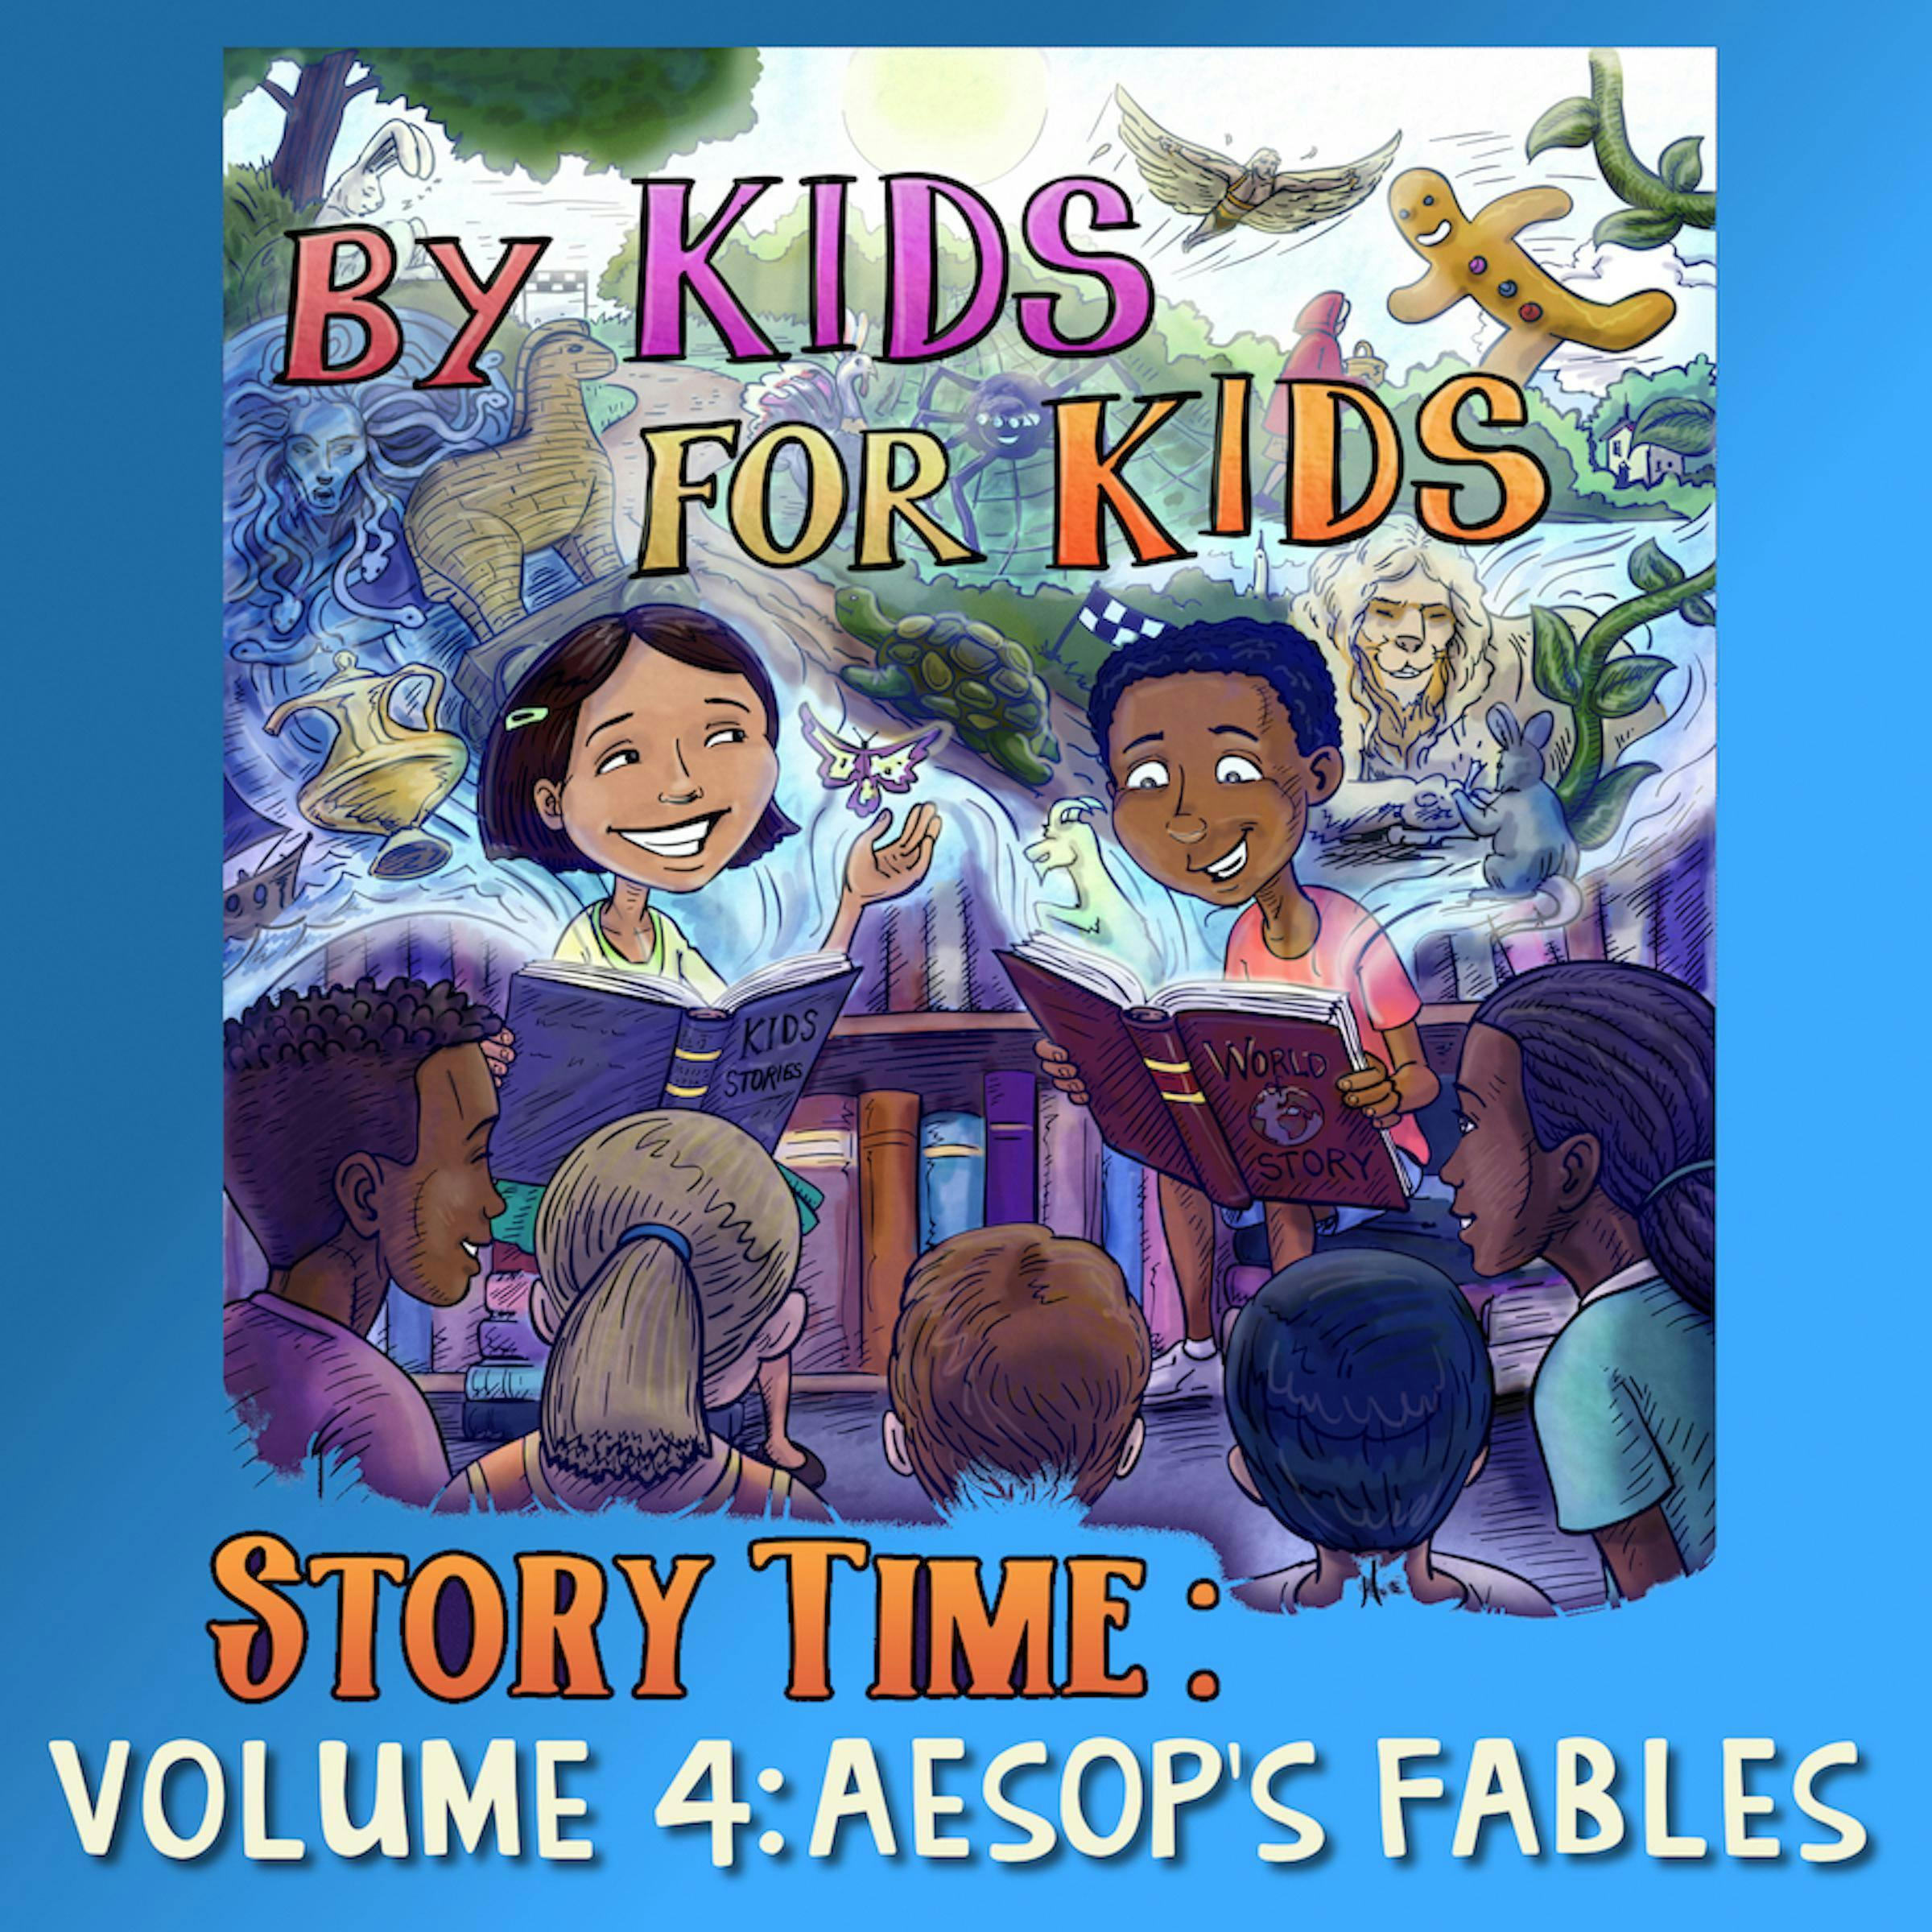 By Kids For Kids Story Time: Volume 04 - Aesop's Fables - By Kids For Kids Story Time